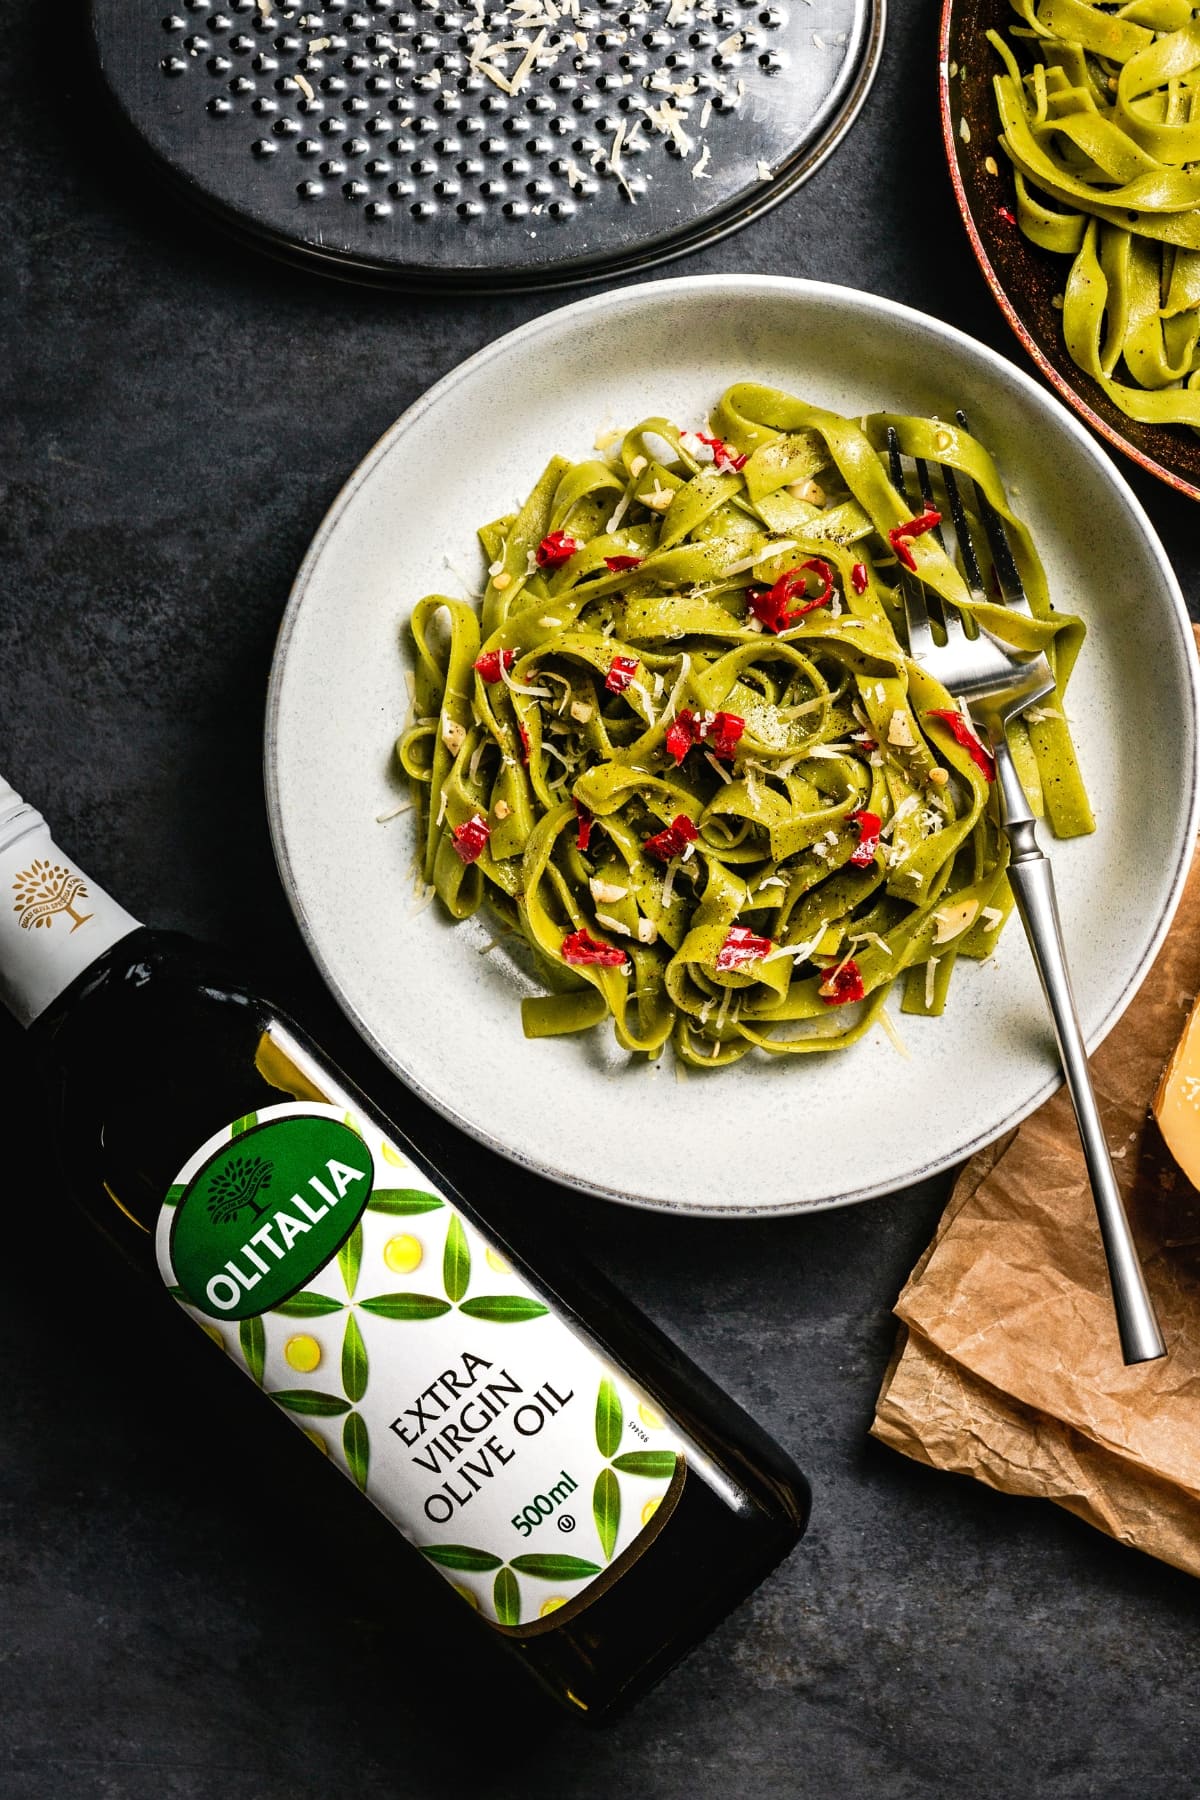 Regular vs. Extra-Virgin Olive Oil: What's the Difference?